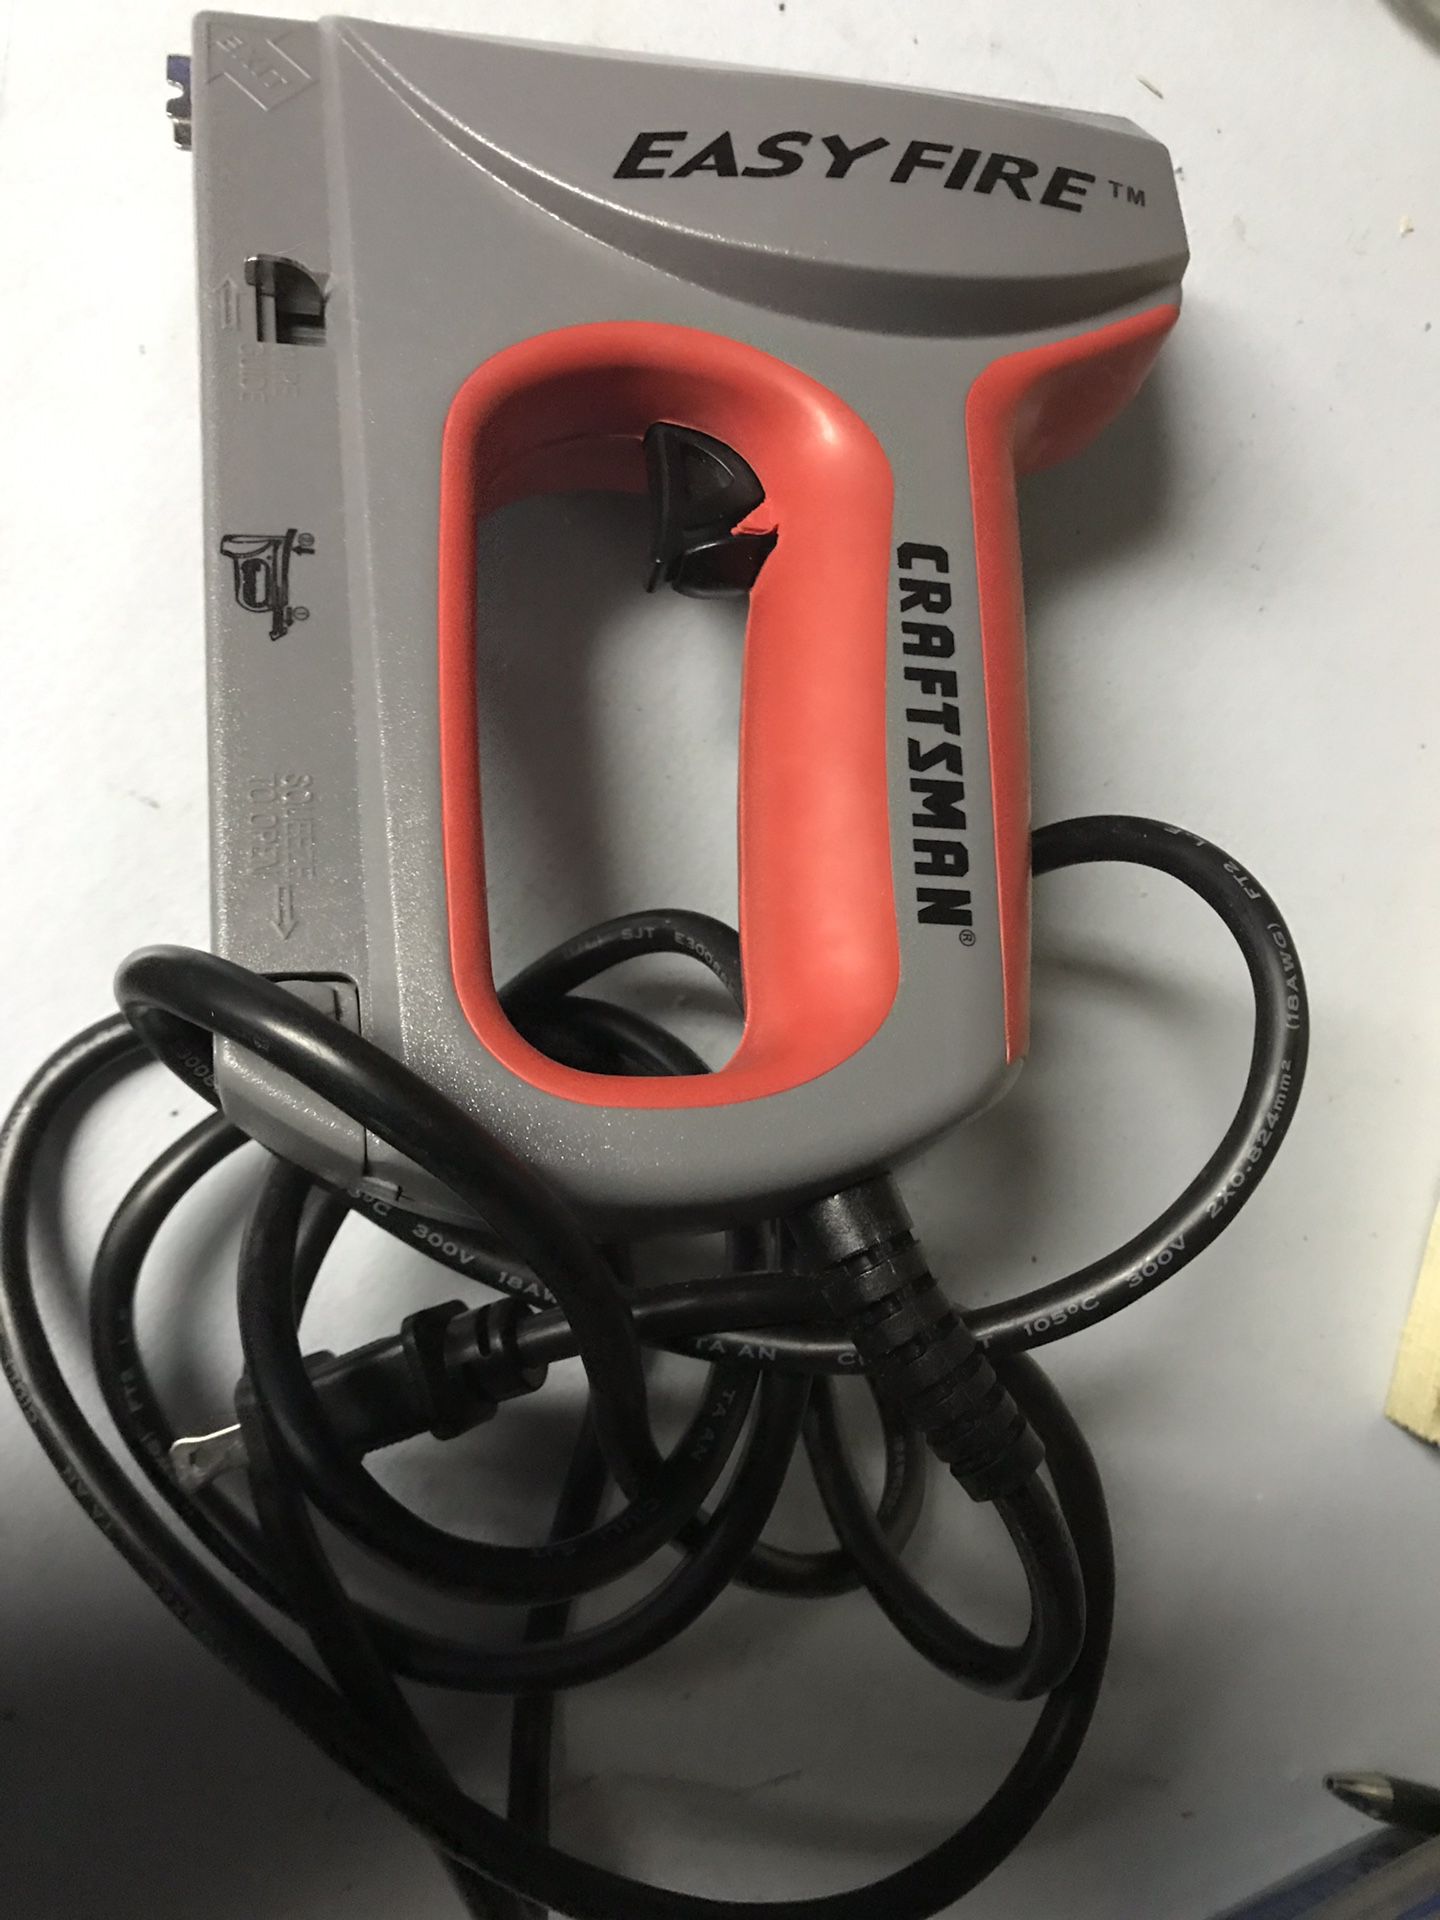 Craftsman easy fire electric staple/nail gun like new $30